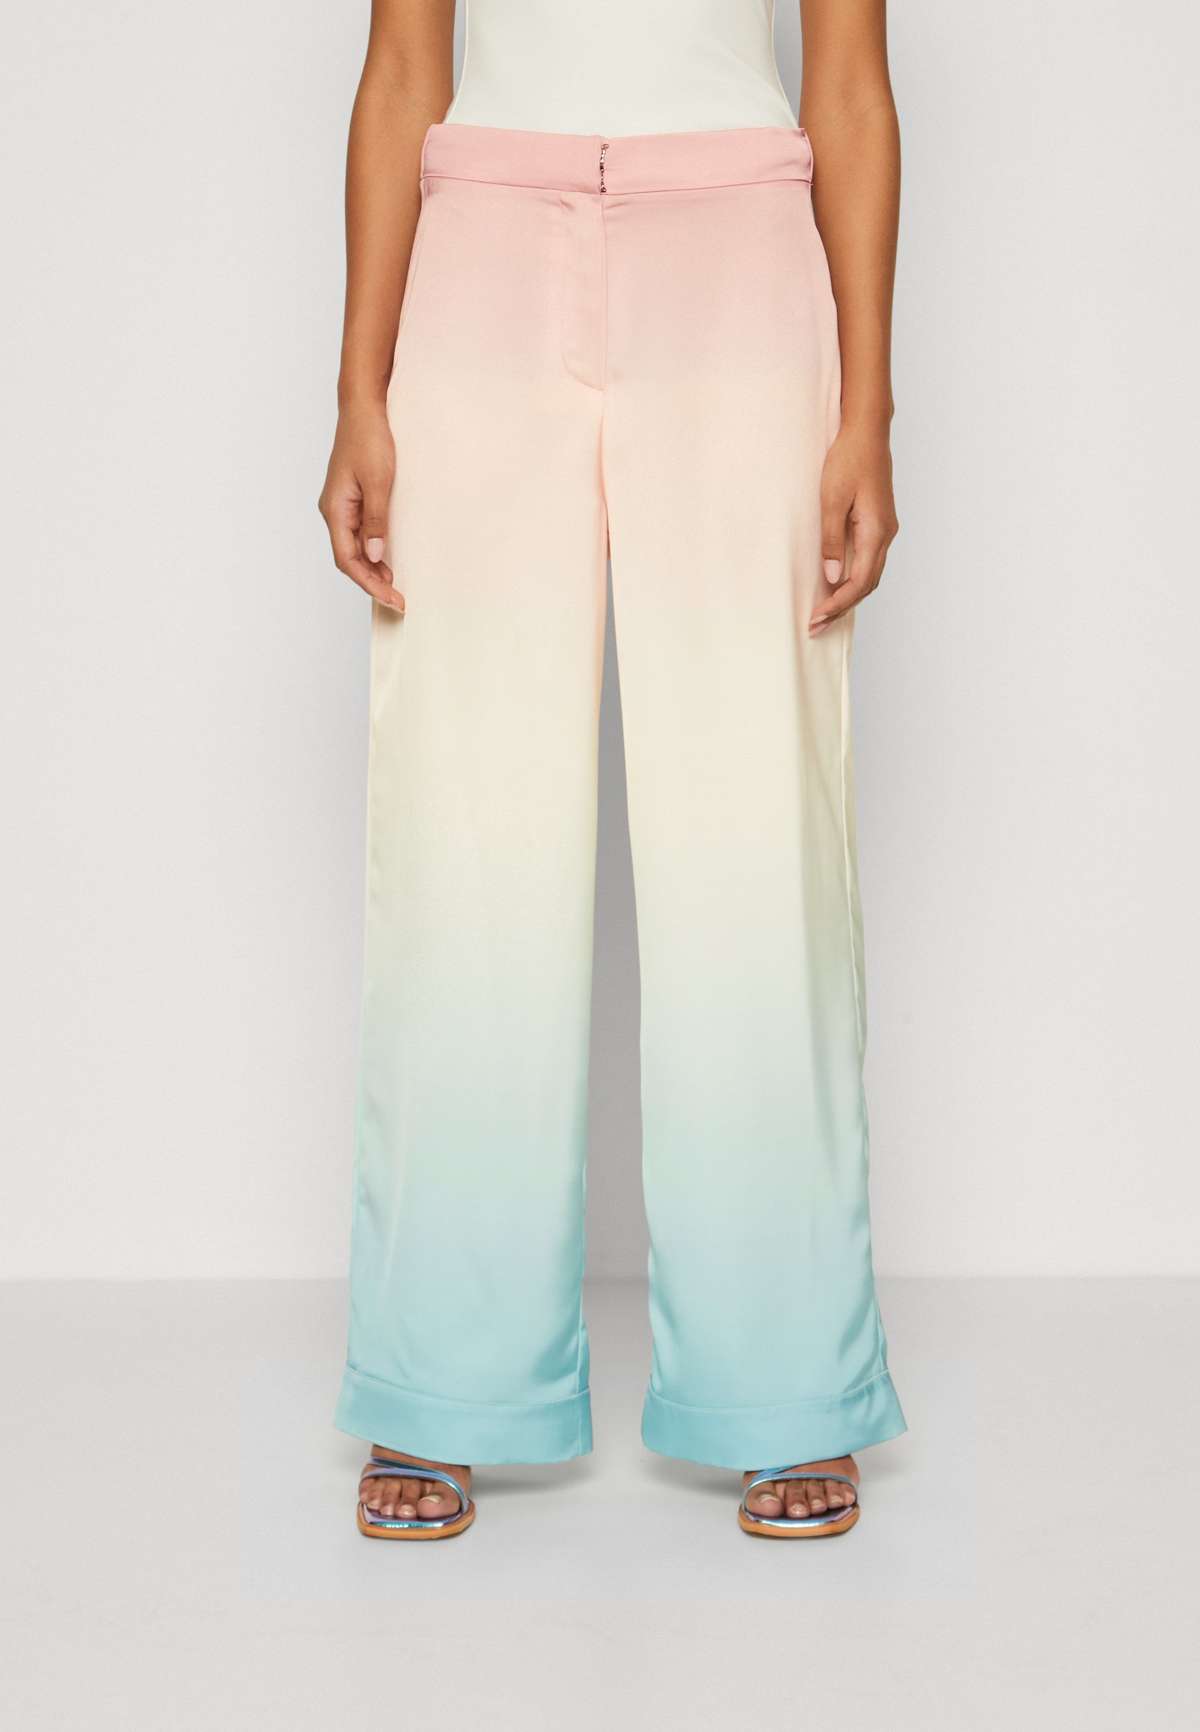 Брюки HAVEN HIGH RISE OMBRE PANTS